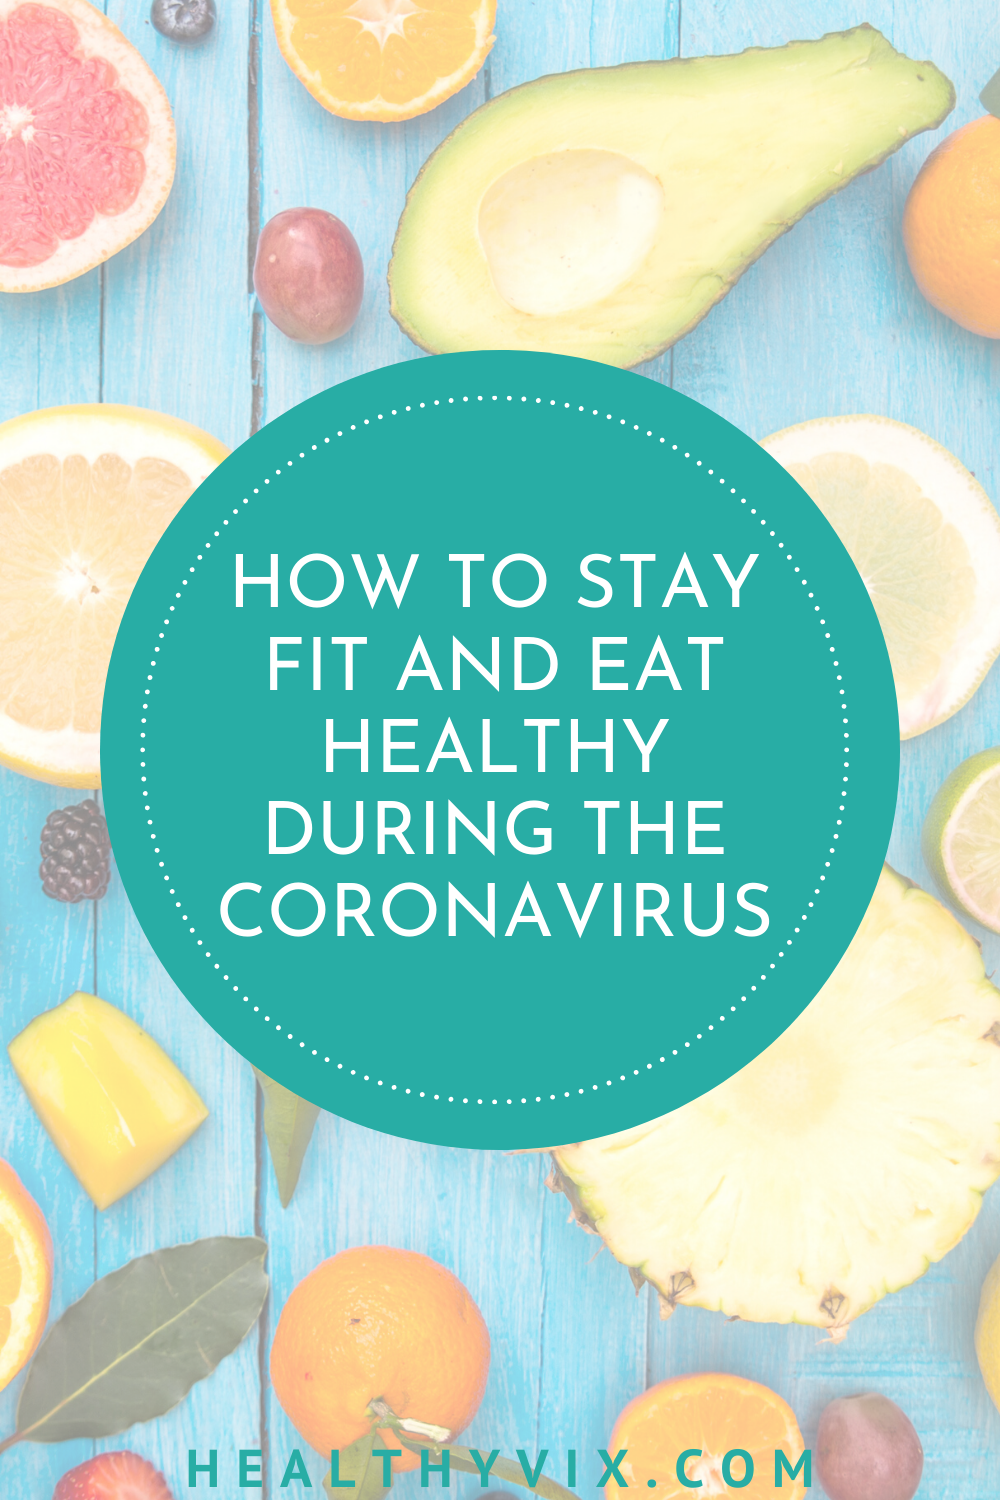 How to stay fit and eat healthy during the coronavirus